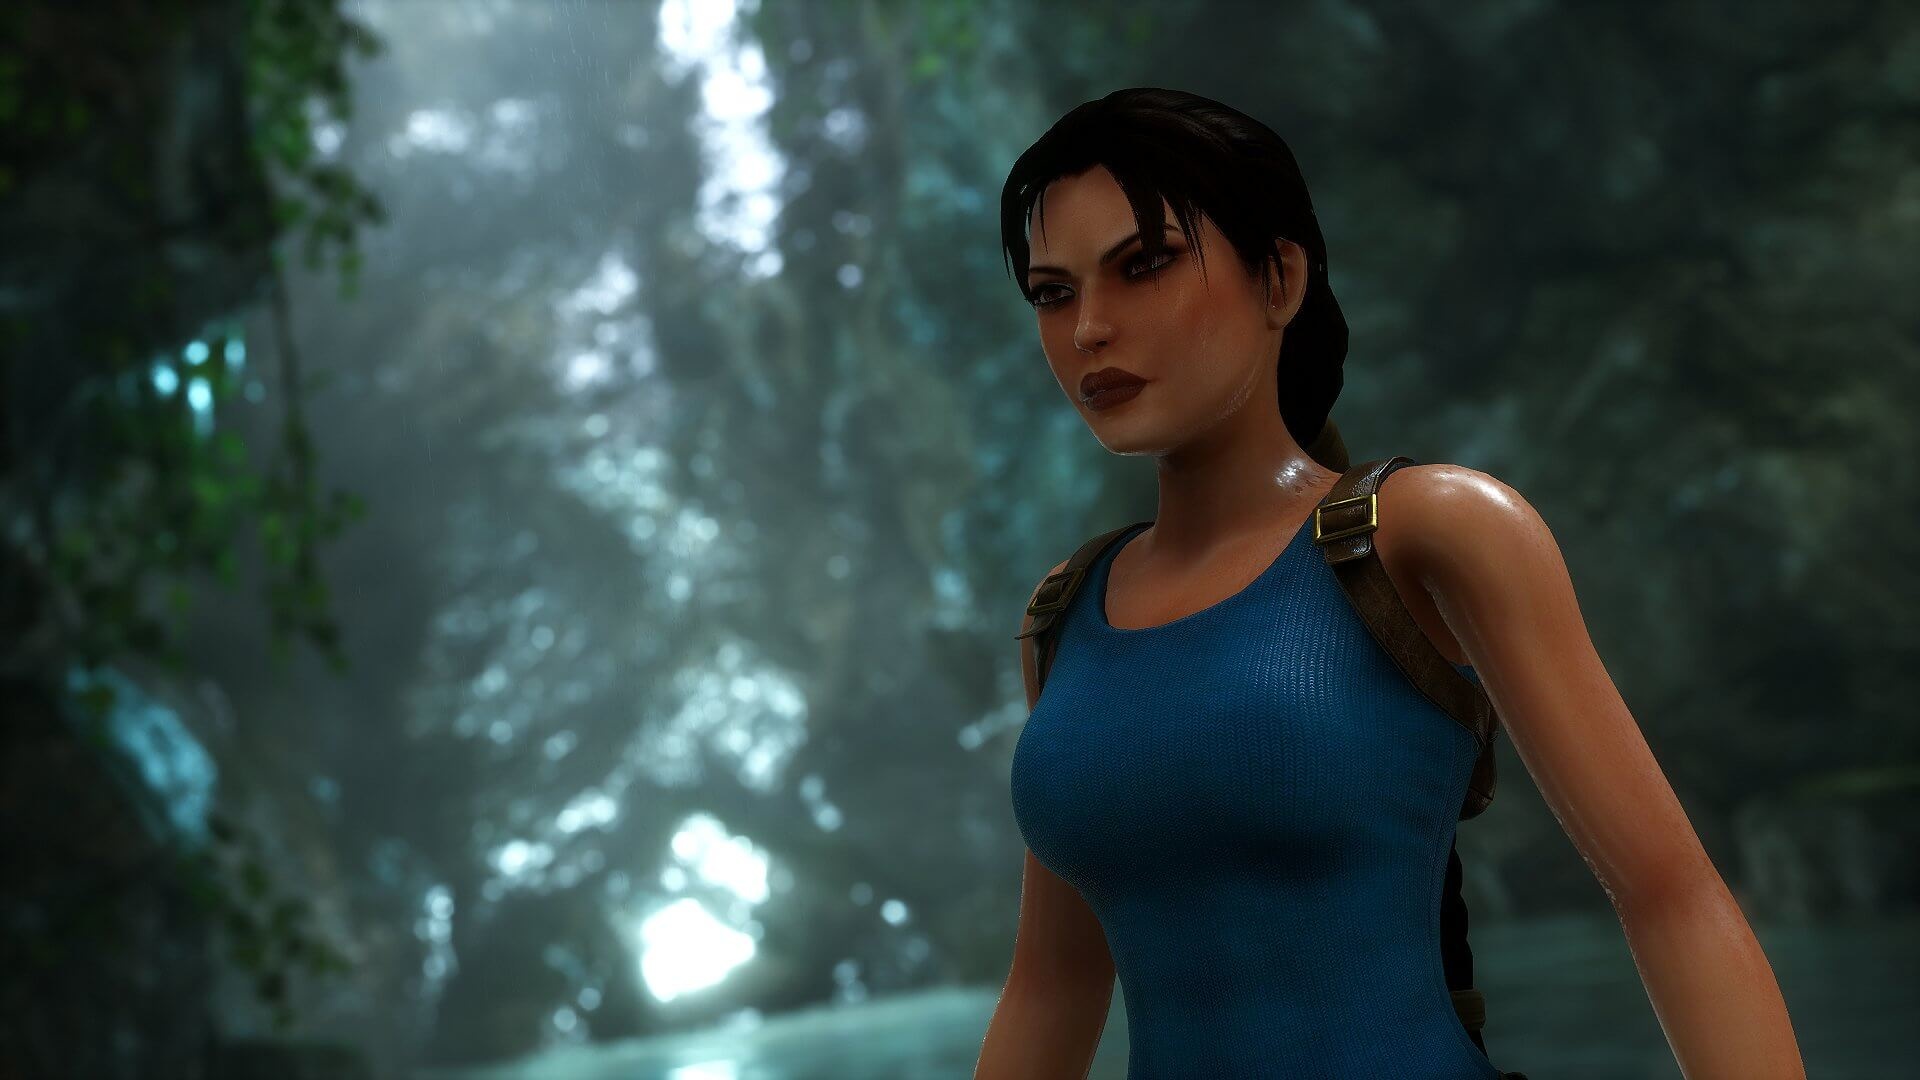 Tomb Raider 2 in Unreal Engine 4: Playable Demo Looks Great